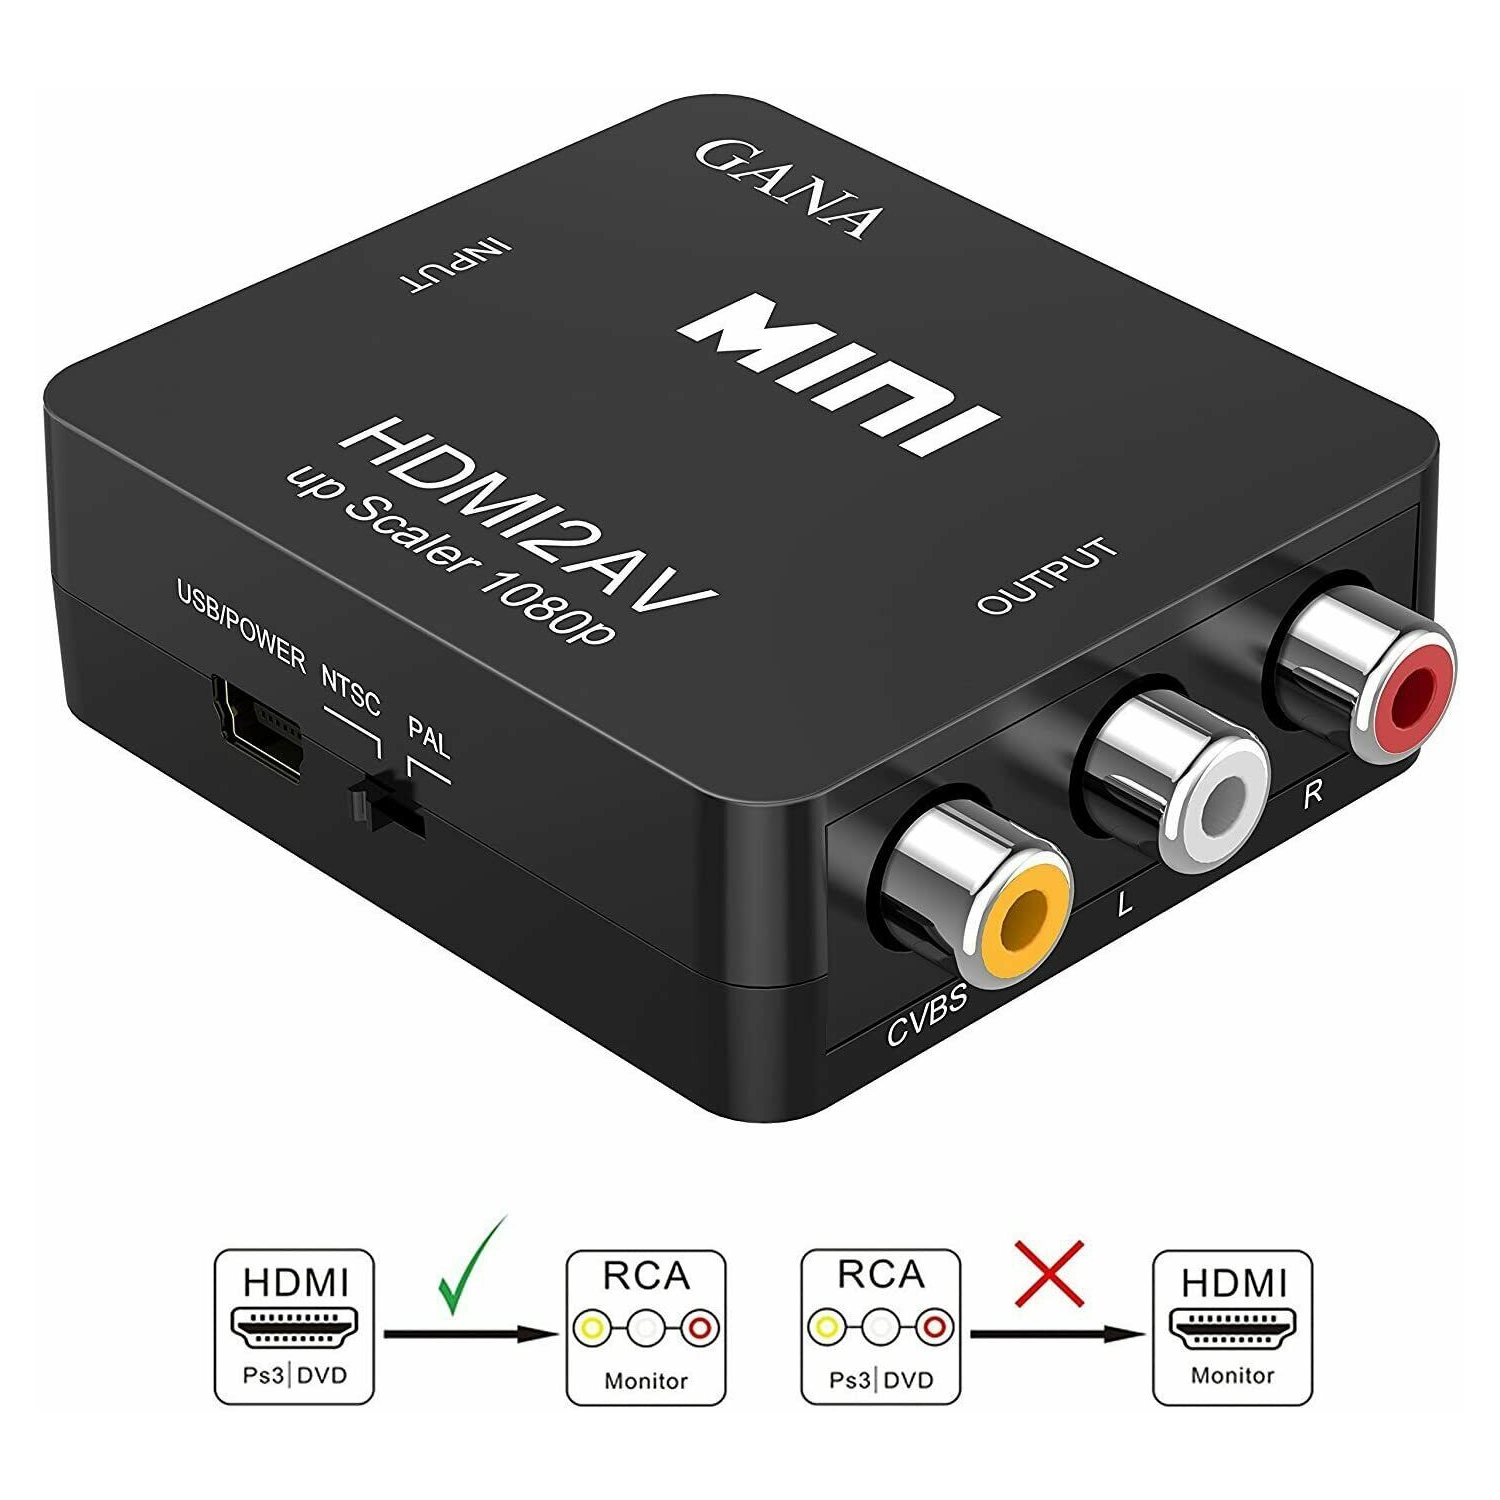 HDMI to AV Converter 1080p HDMI to 3RCA /AV/CVBS Composite Video Audio Adapter Supporting PAL/NTSC with USB Charge Cable for TV/VHS/PC/Laptop/Xbox/HDTV/DVD recorders (Black)